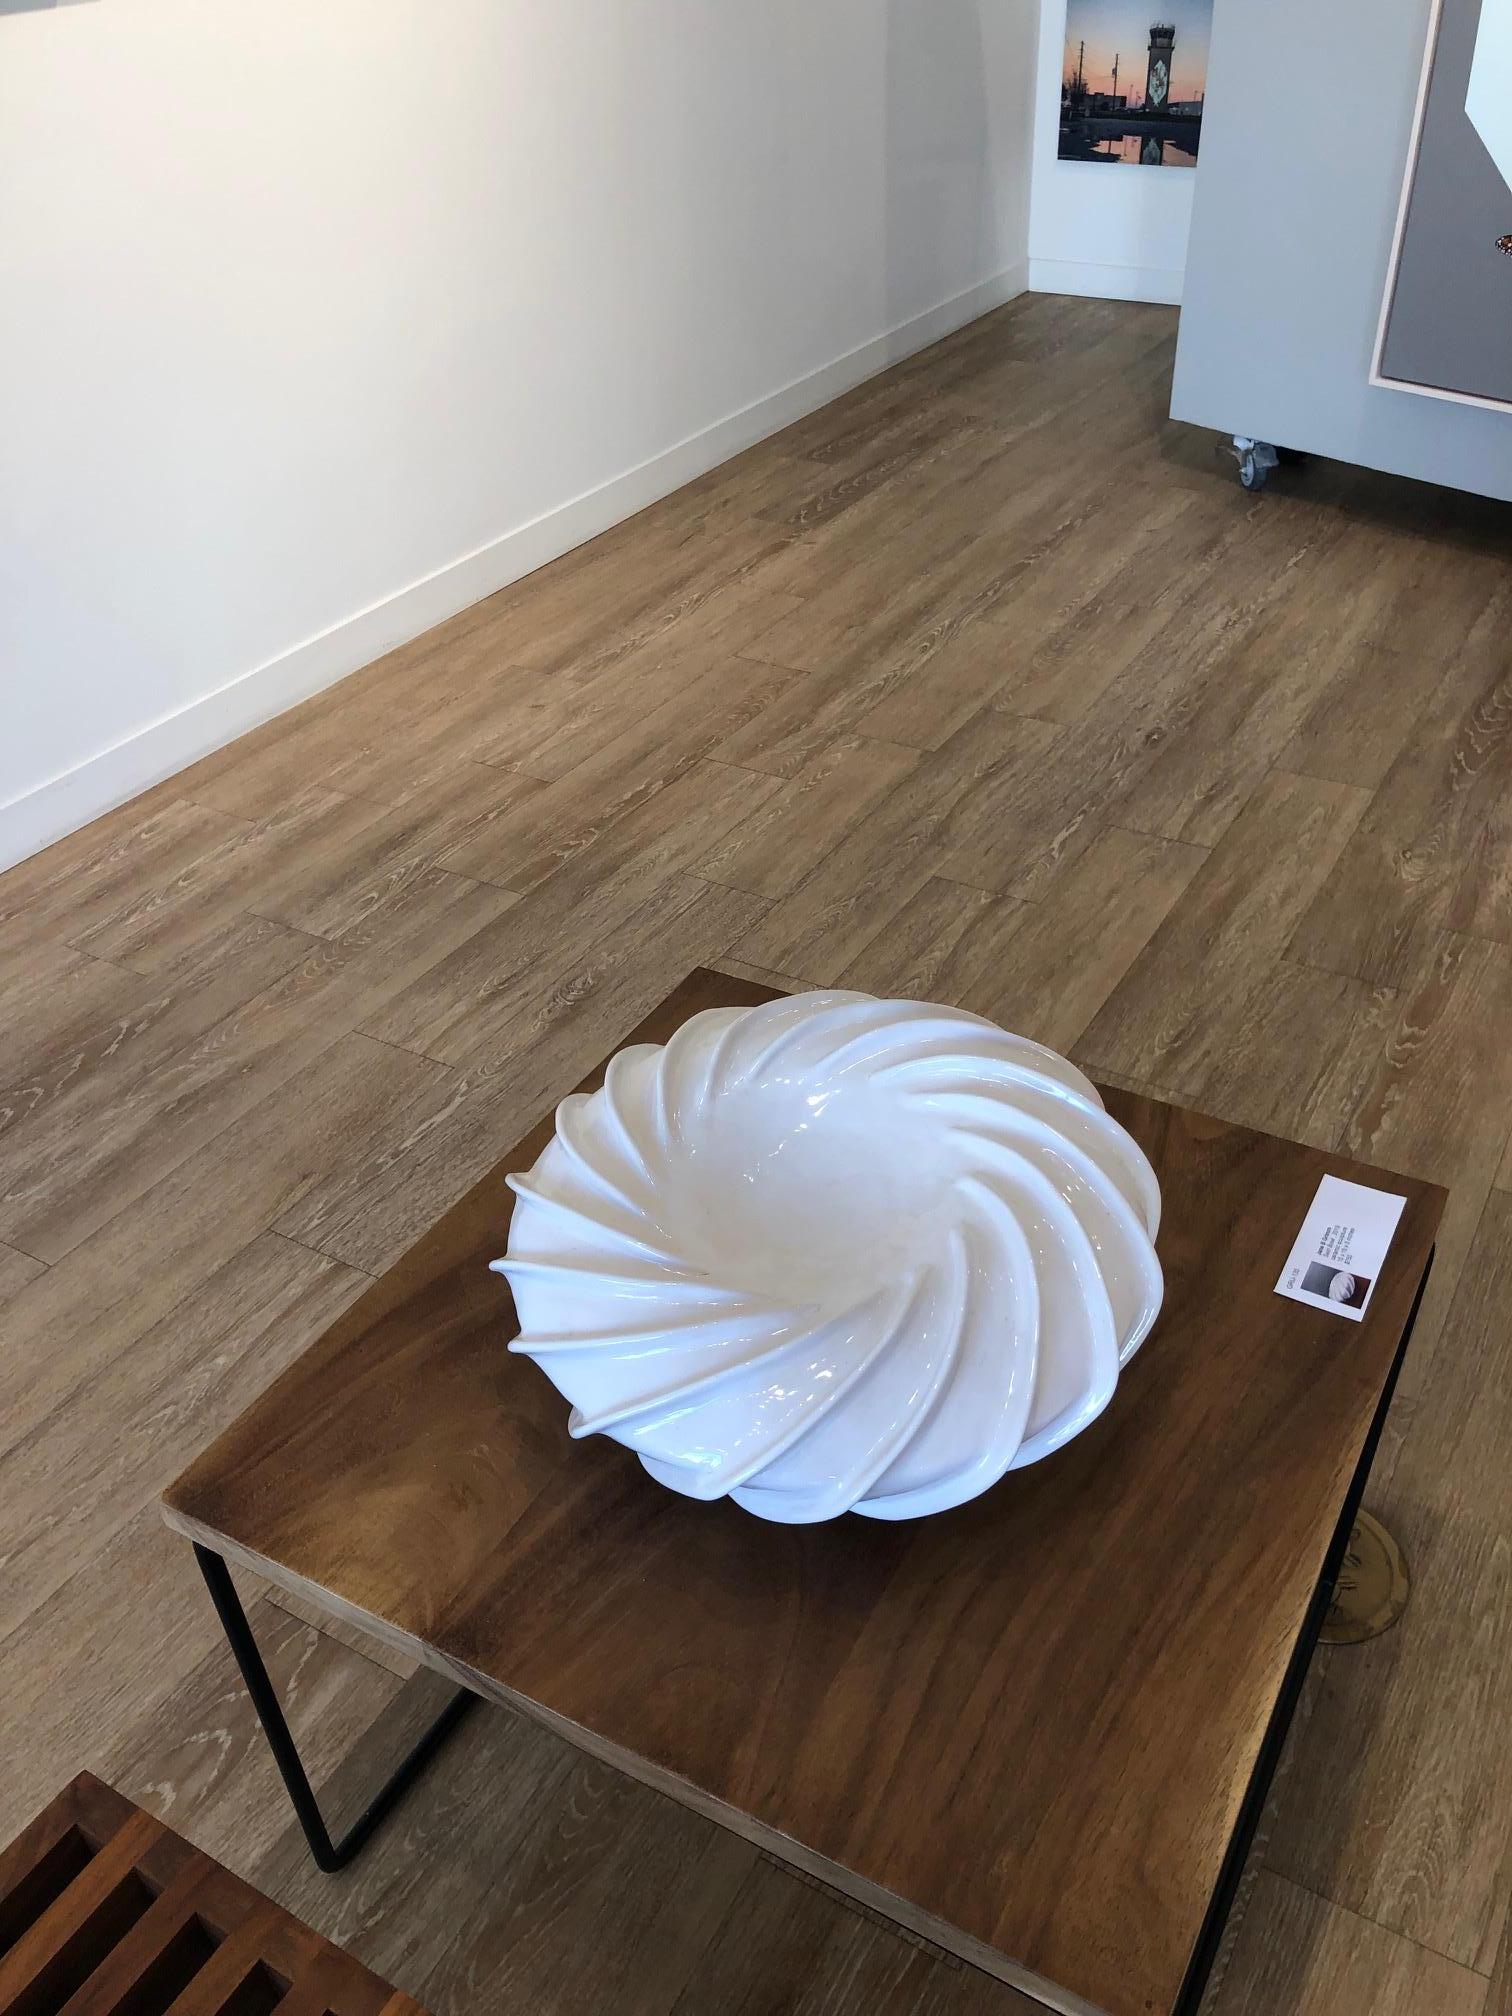 White circular abstract table sculpture from Pop Art pioneer Jane B. Grimm, who began her artistic career in the 1960’s, when her free-form sculptural jewelry exploded onto the fashion scene in NYC. Her designs spoke to a new generation well into